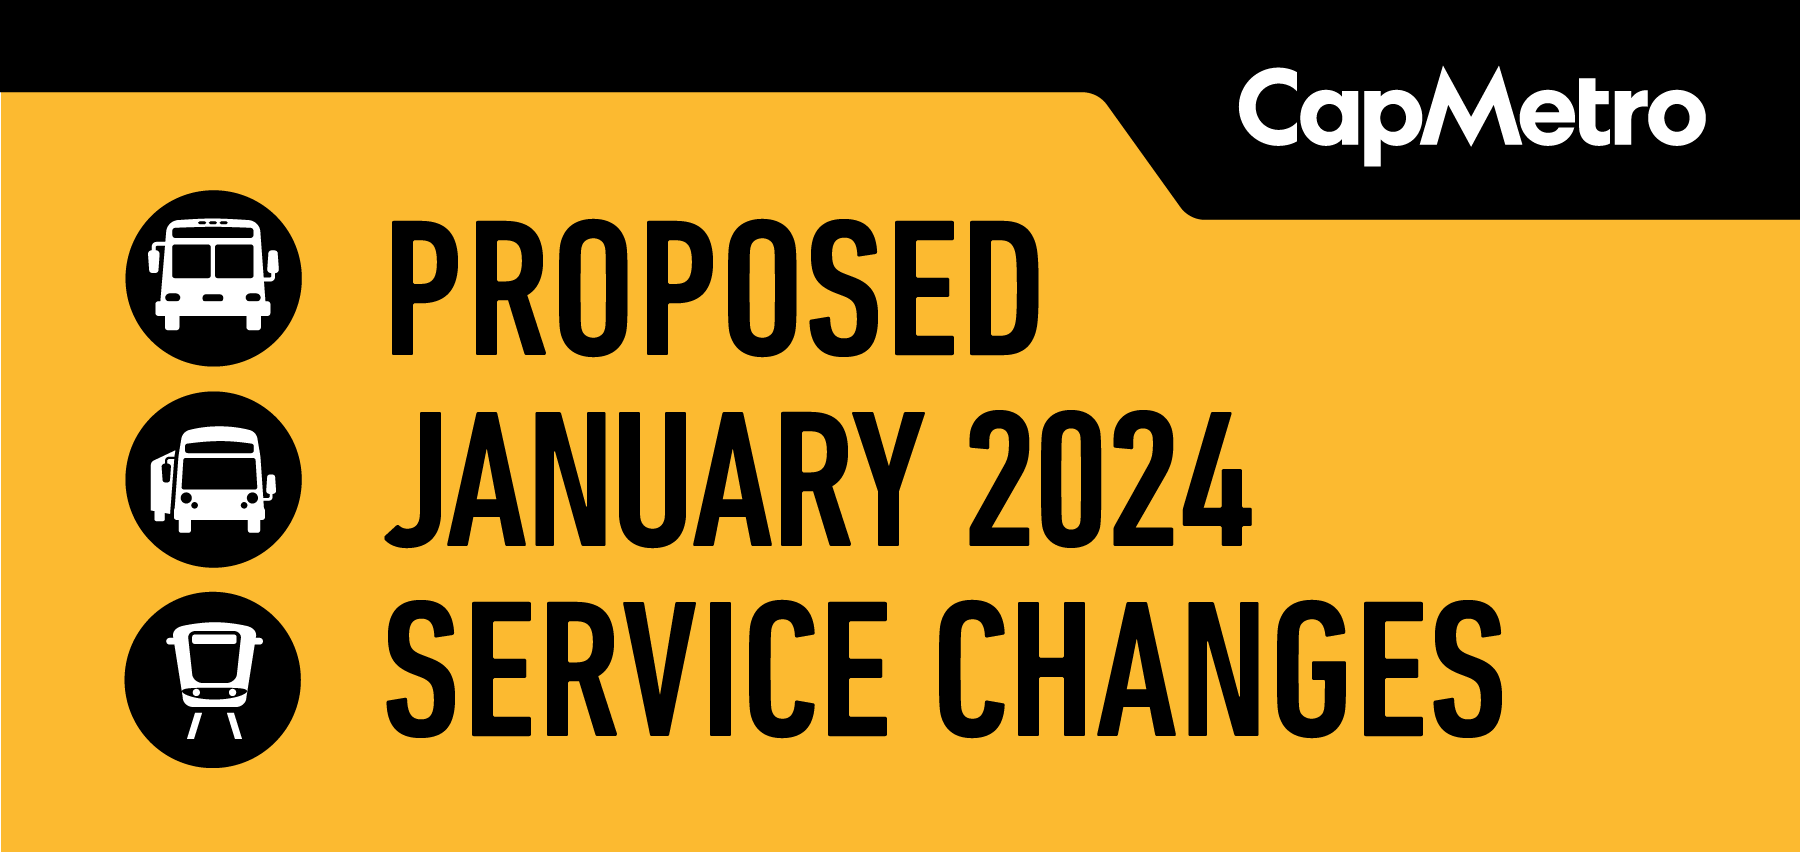 Proposed January 2024 Service Changes